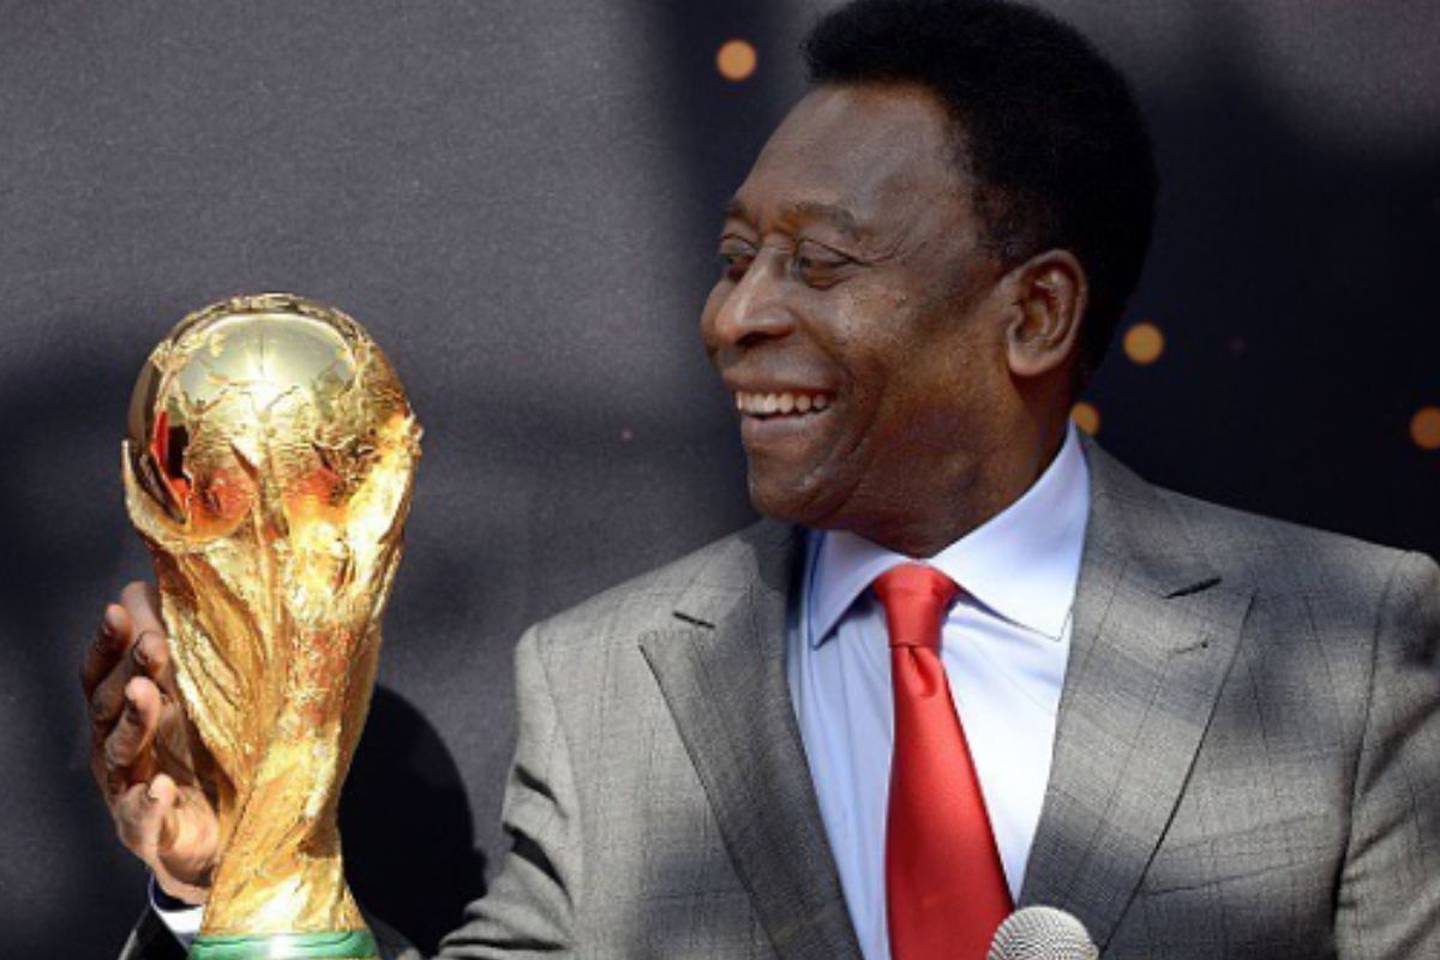 Wake for Pelé will last 24 hours